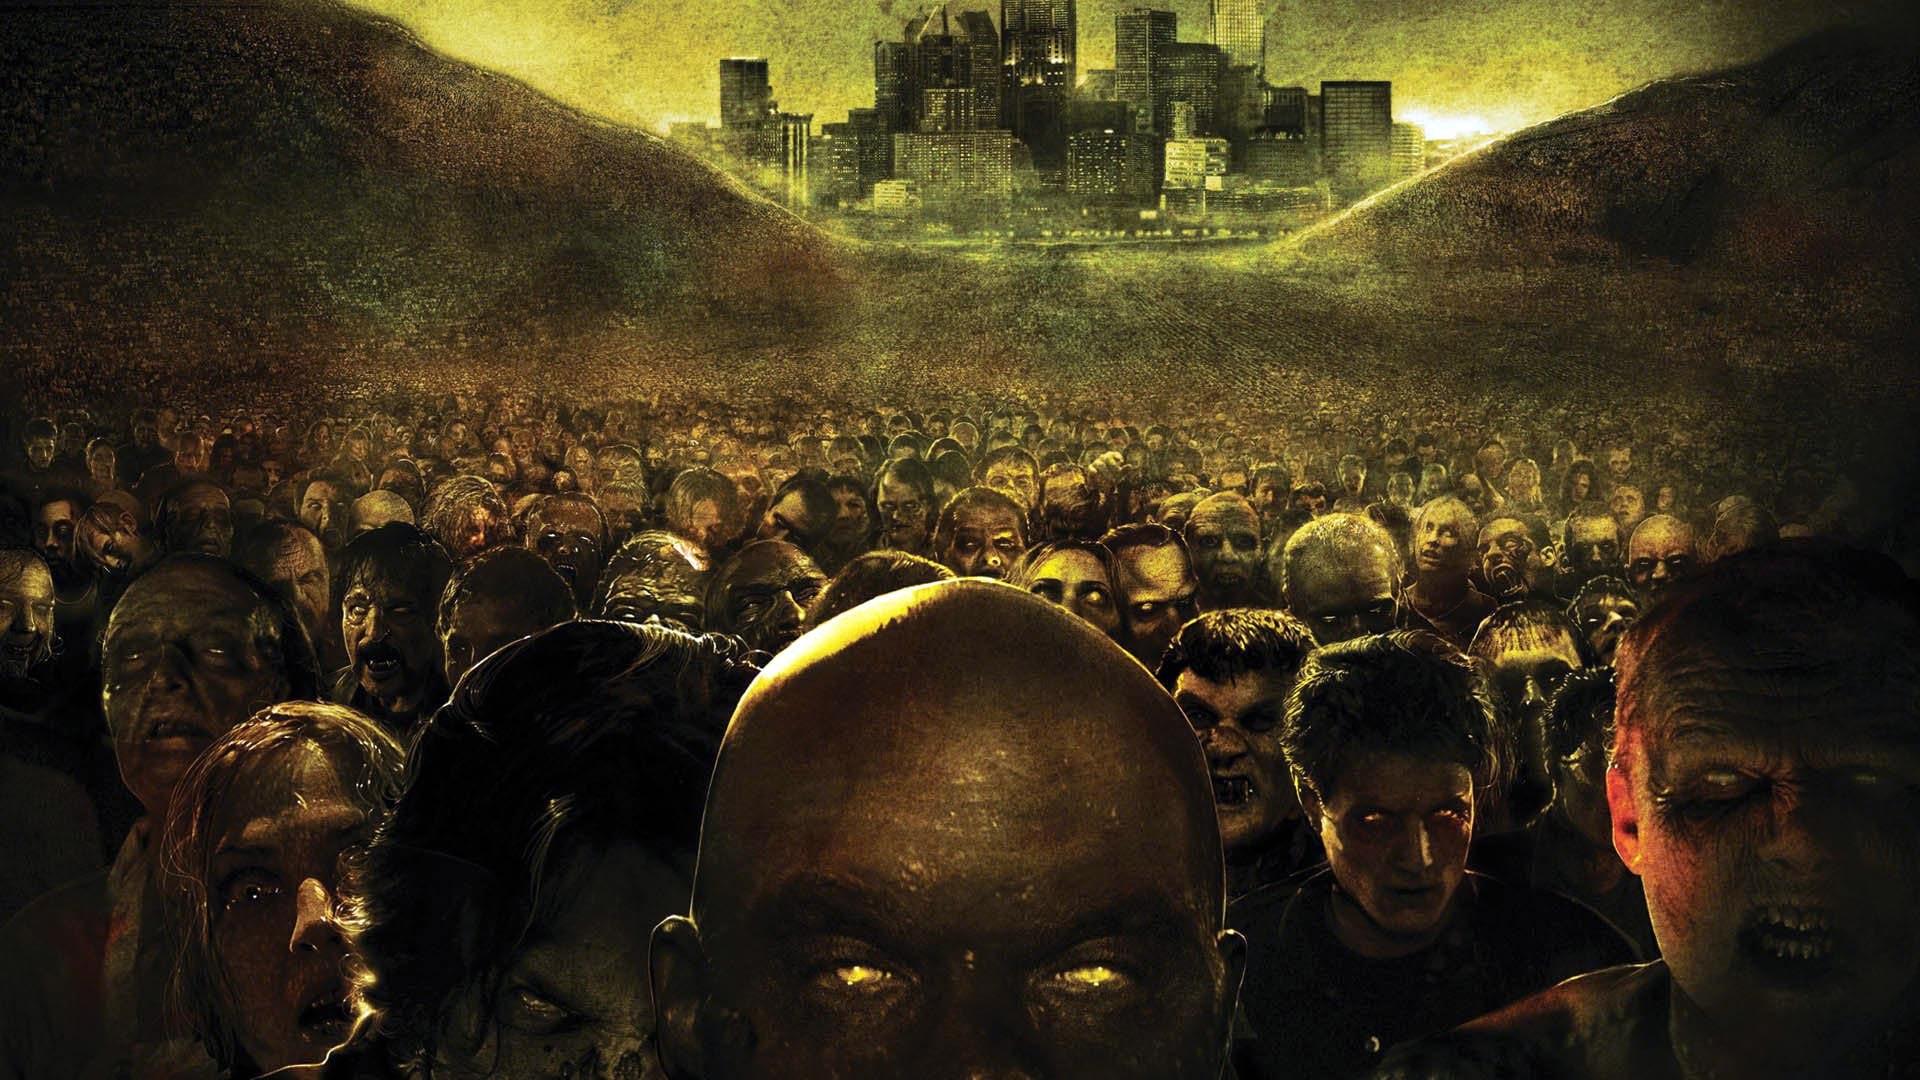 Zombies wallpaper 1920x1080 - (#30776) - High Quality and ...